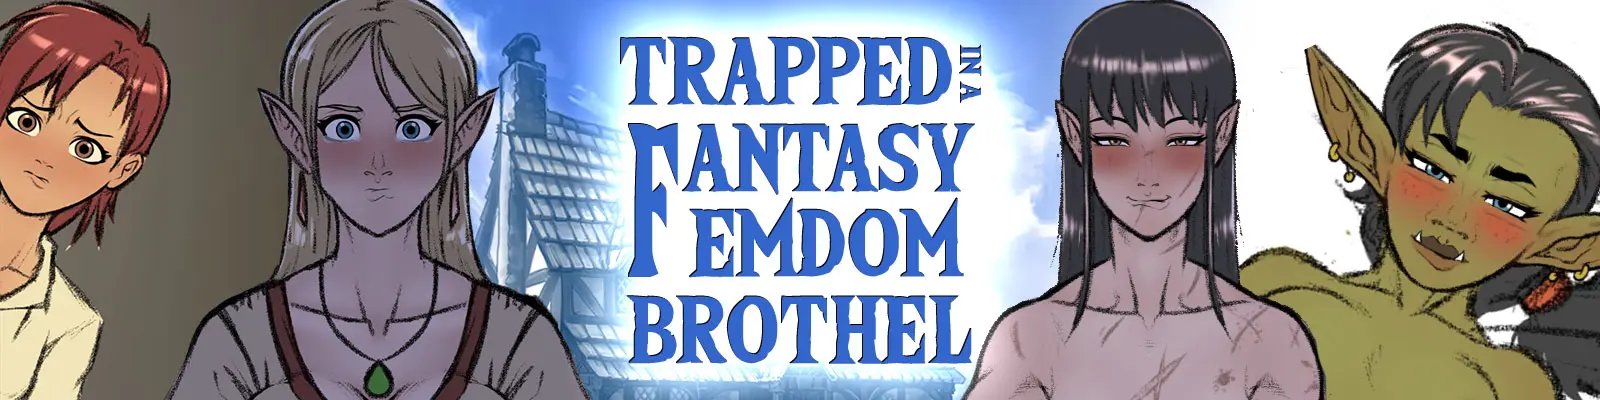 Trapped in a Fantasy Femdom Brothel main image